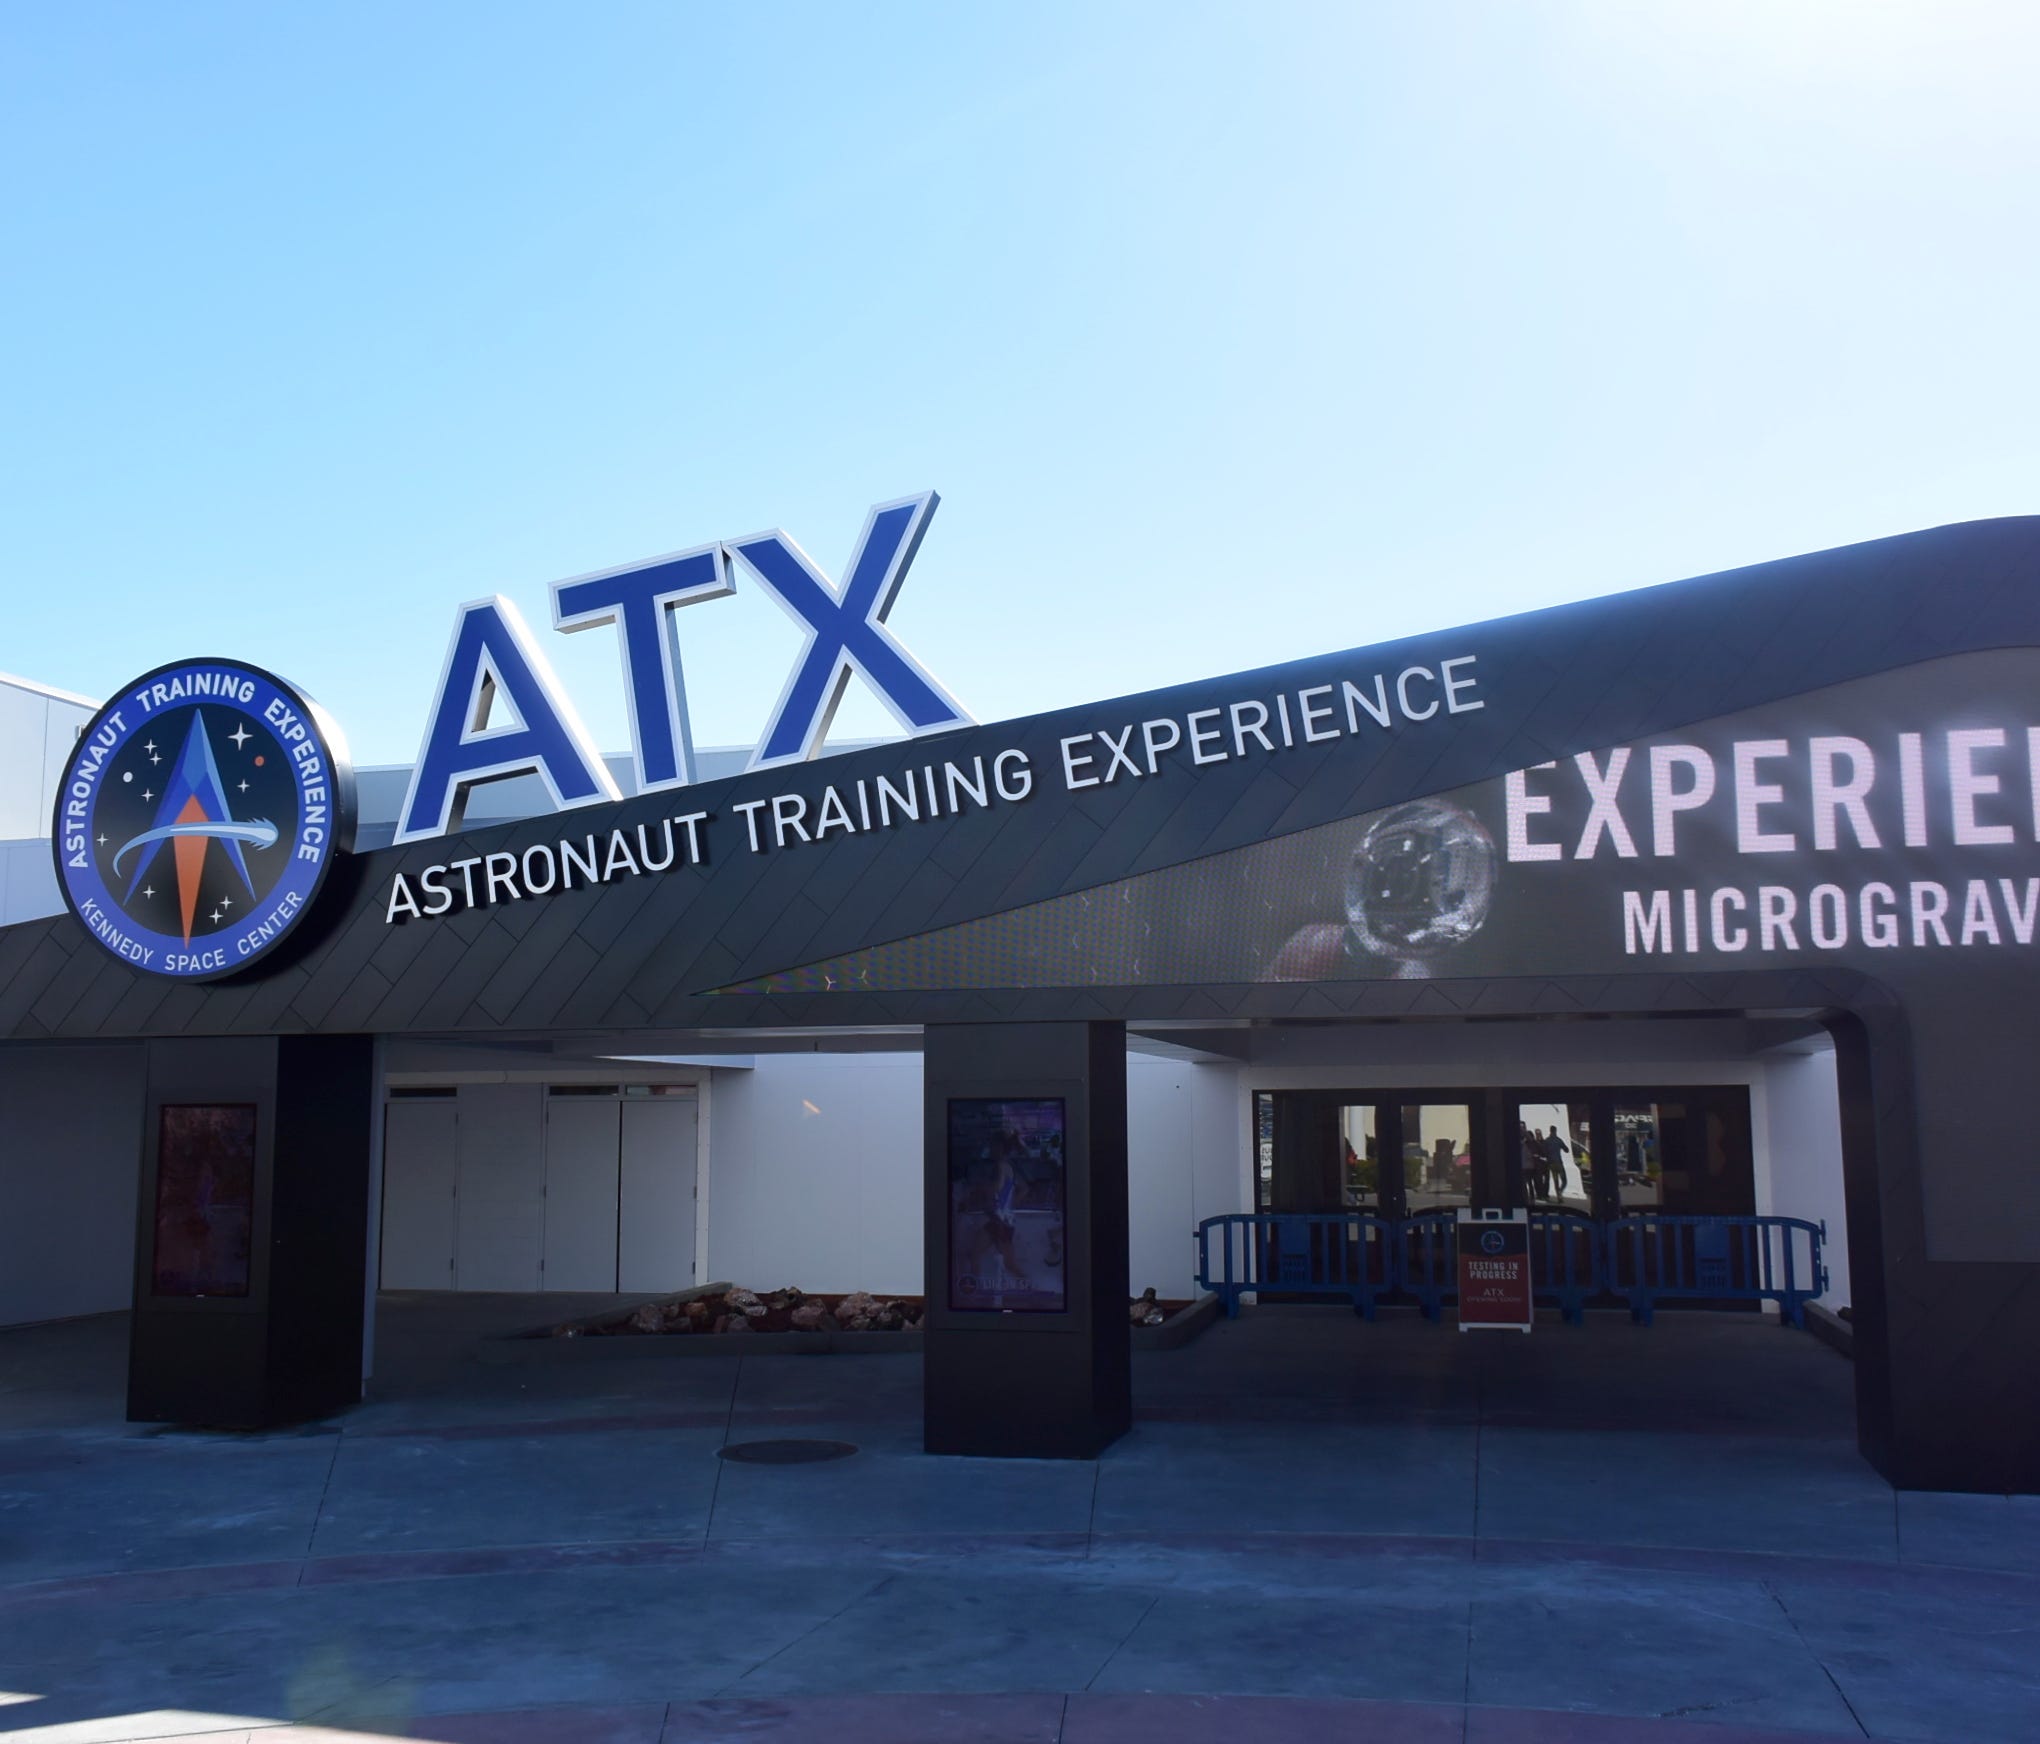 The entrance into the new Astronaut Training Experience (ATX) from inside the Kennedy Space Center Visitor Complex.